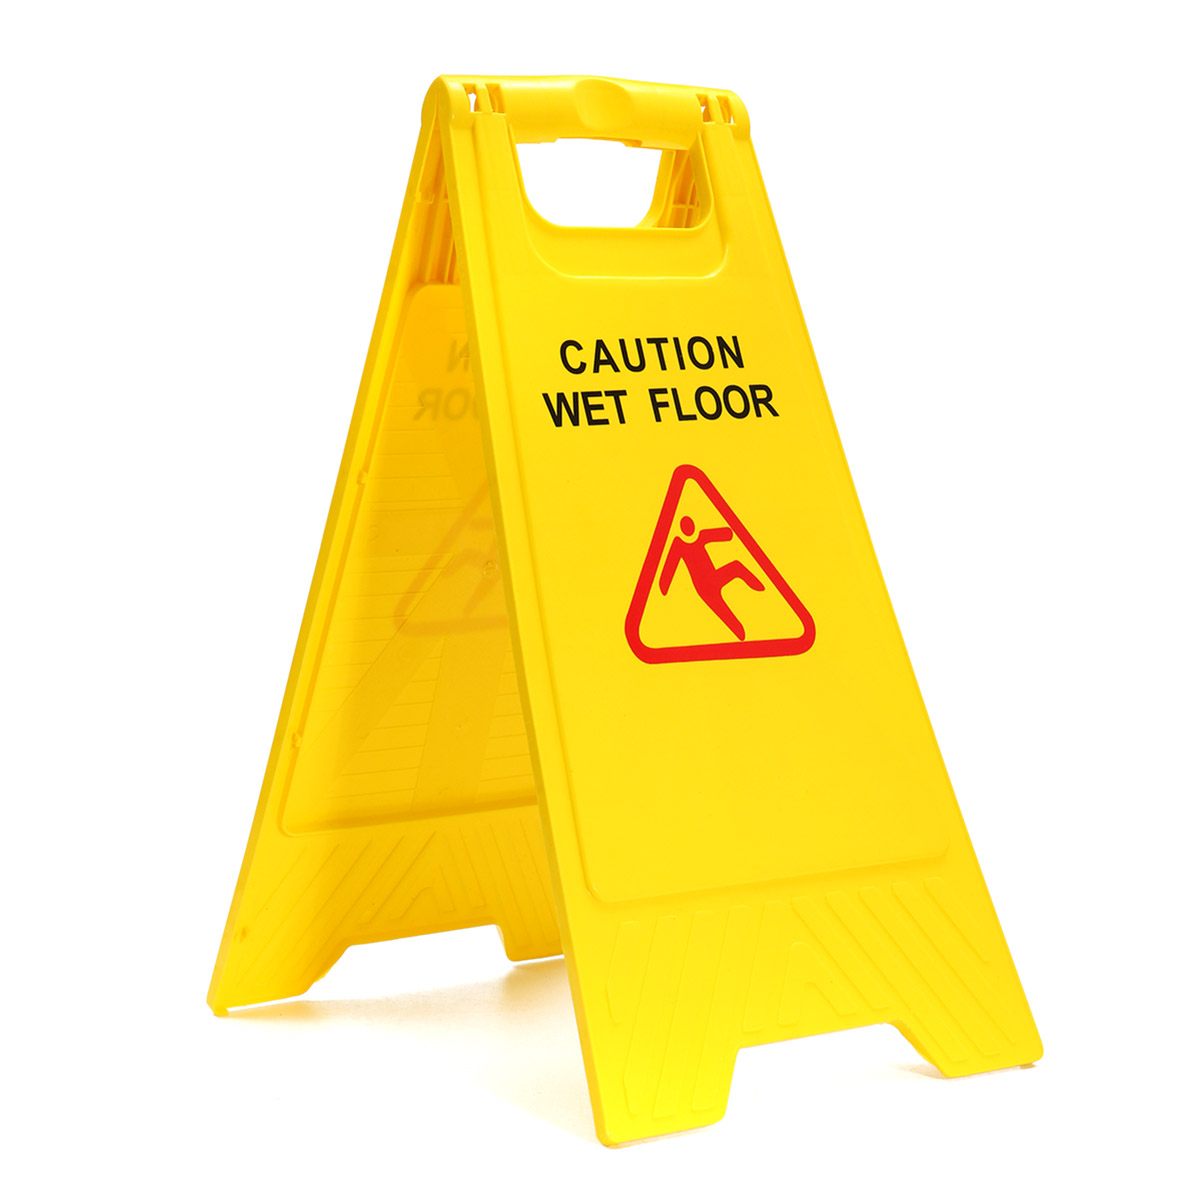 Plastic-Caution-Wet-Floor-Folding-Safety-Sign-Cleaning-Slippery-Warning-1637263